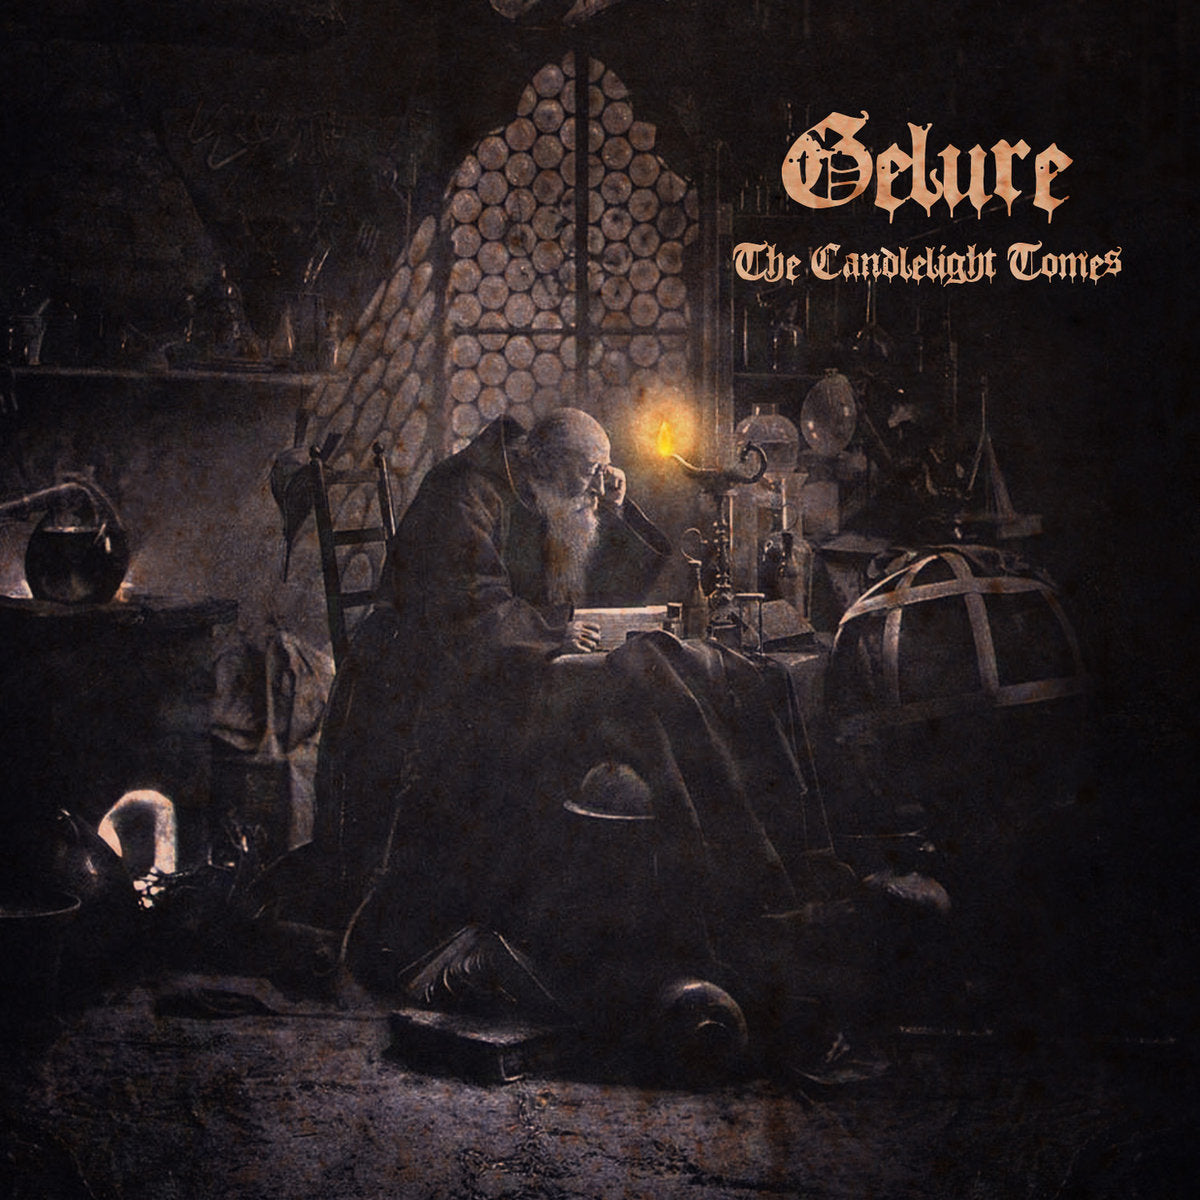 [SOLD OUT] GELURE "The Candlelight Tomes" CD (digipak, w/ map)